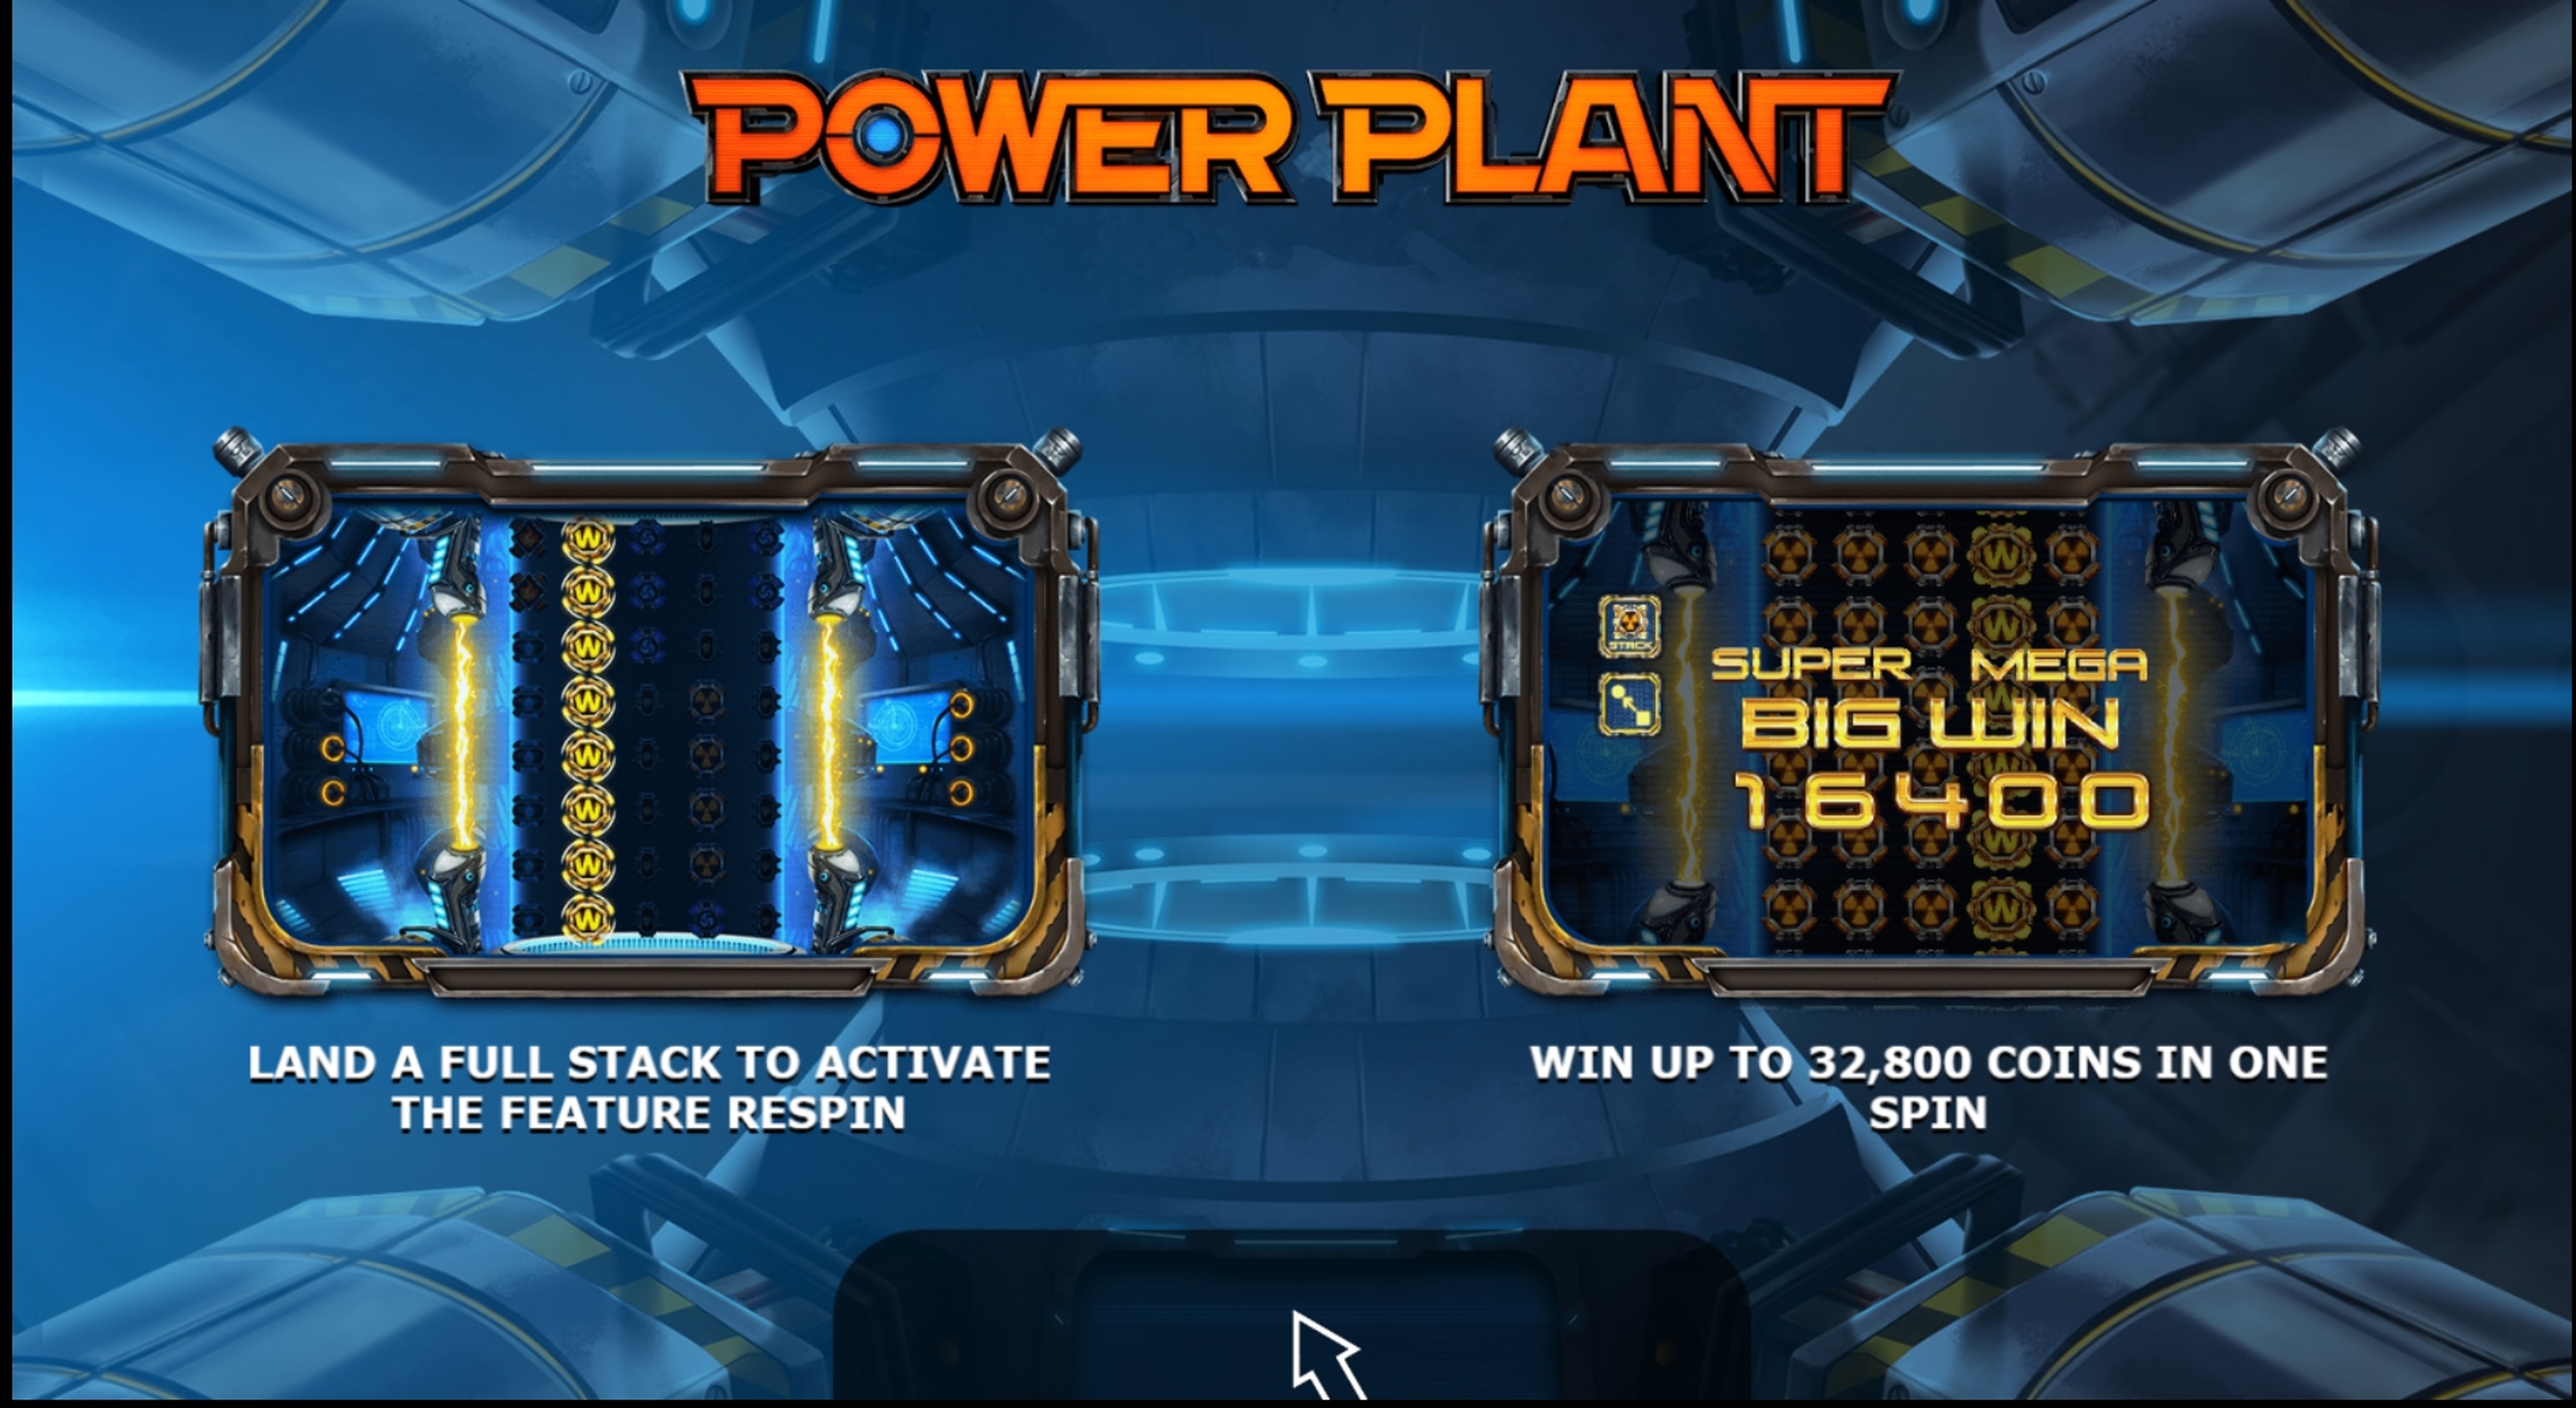 Play Power plant Free Casino Slot Game by Yggdrasil Gaming